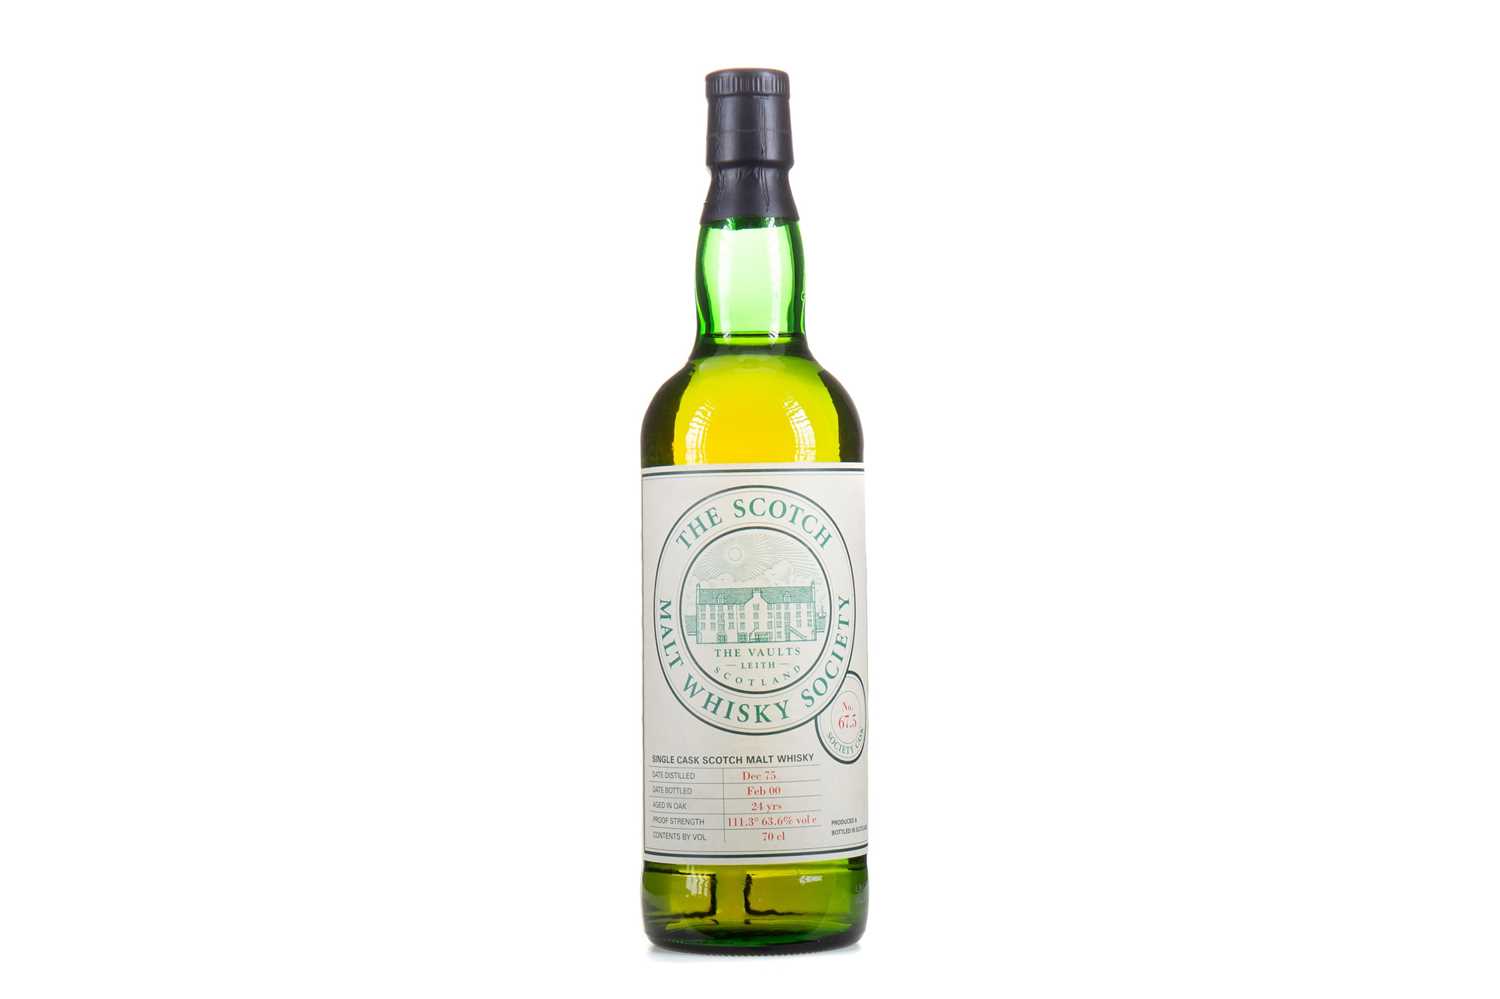 Lot 583 - SMWS 67.5 BANFF 1975 24 YEAR OLD